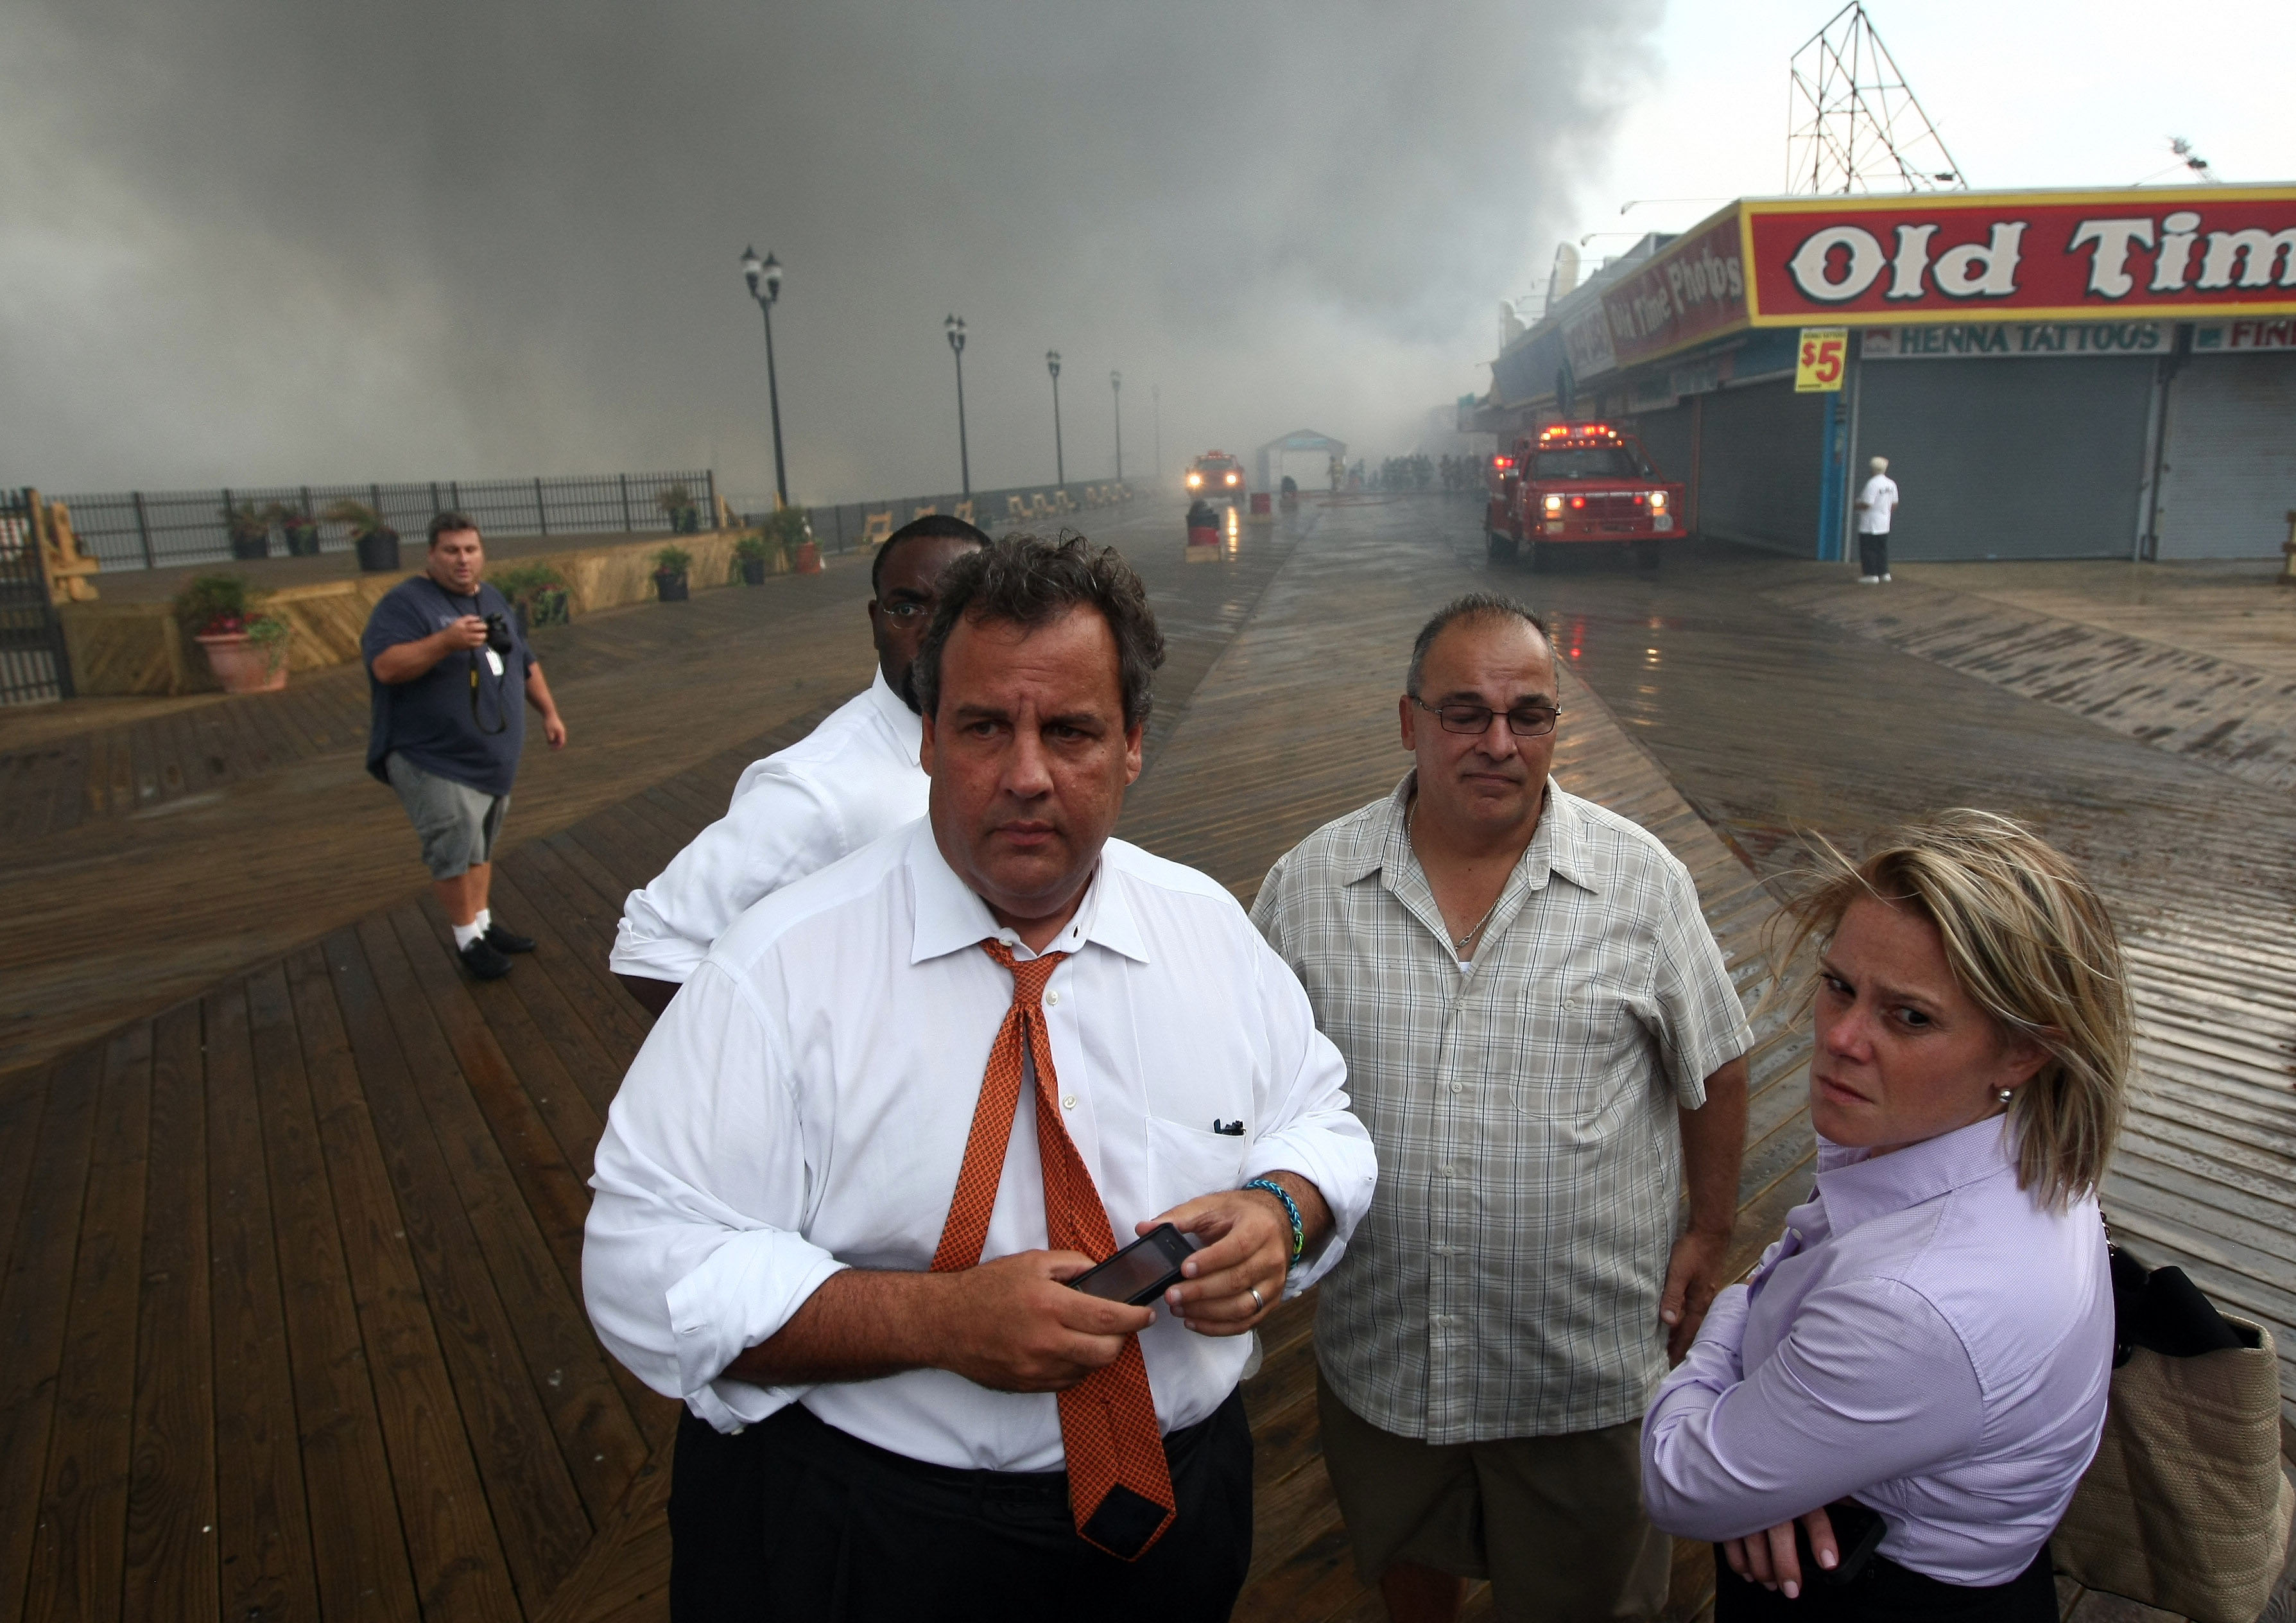 Former Governor Chris Christie with deputy chief of staff Bridget Anne Kelly after a fire at the Seaside Heights boardwalk in September 2013. (Tim Larsen/Office of the Governor Of New Jersey via Getty Images)